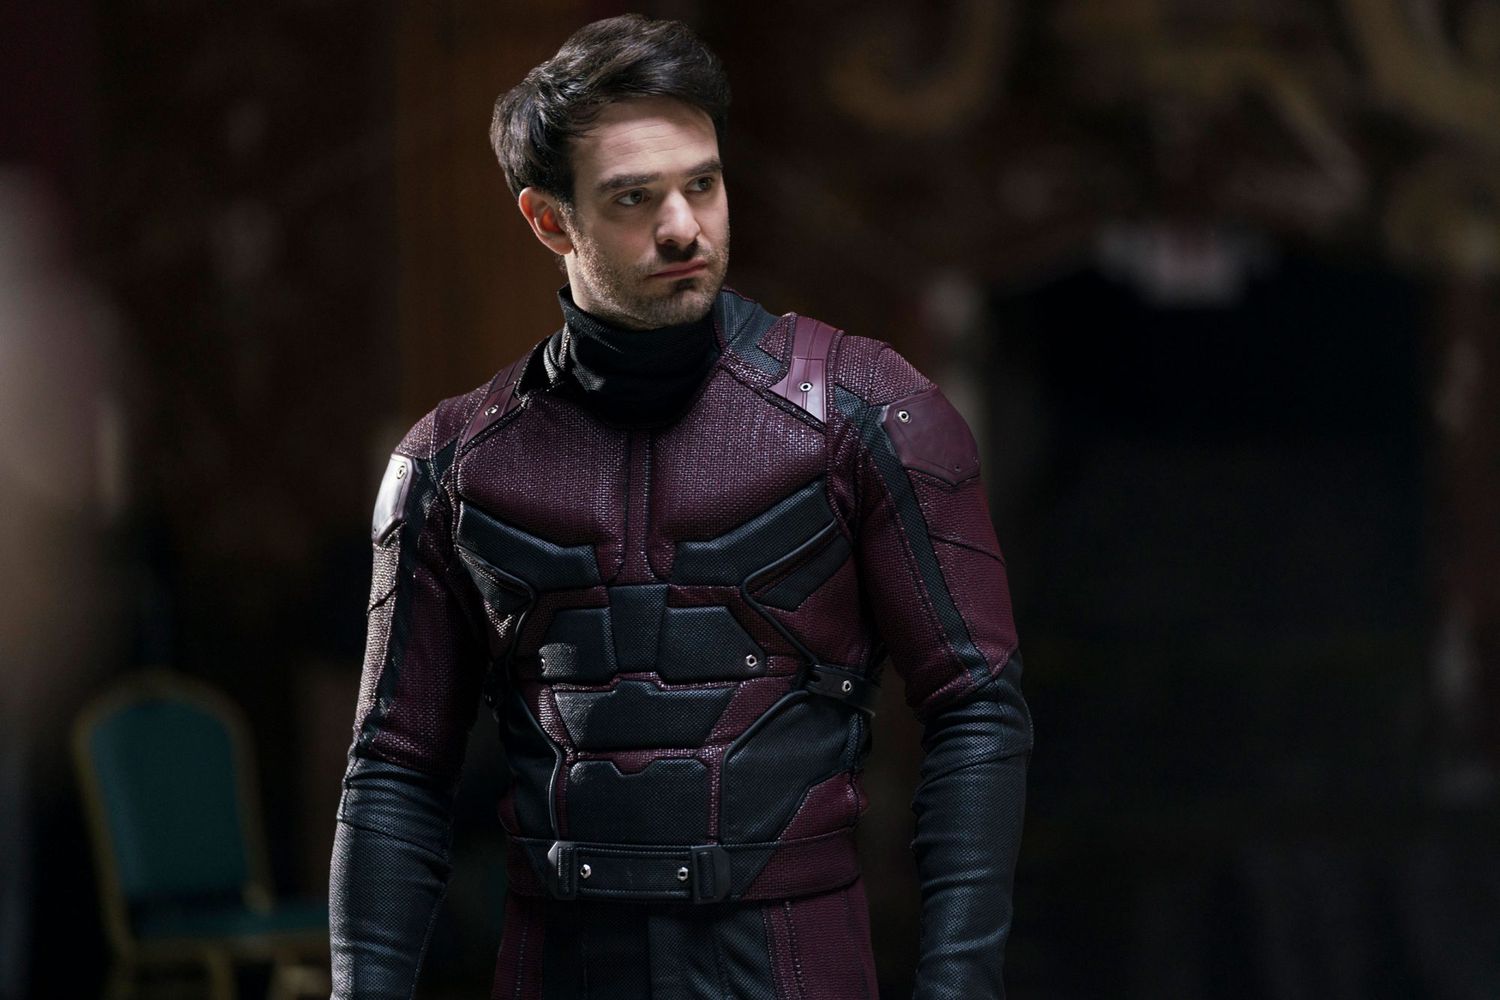 Exciting Comeback: Charlie Cox Revives Daredevil in Action-Packed 'Born Again' Series